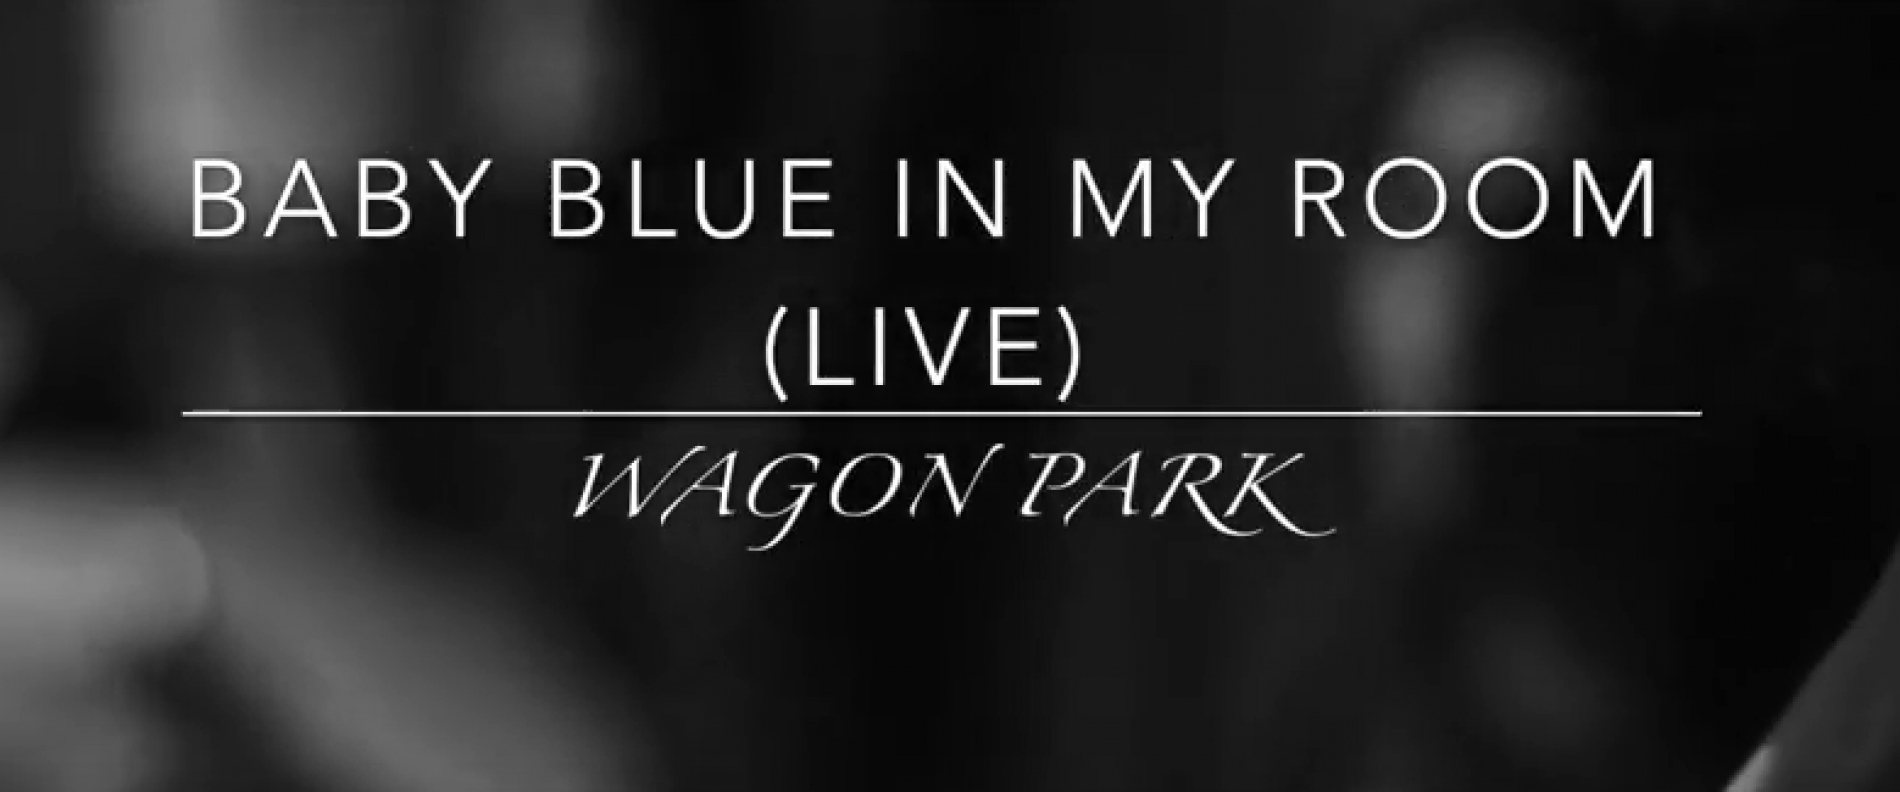 Wagon Park – Baby Blue In My Room